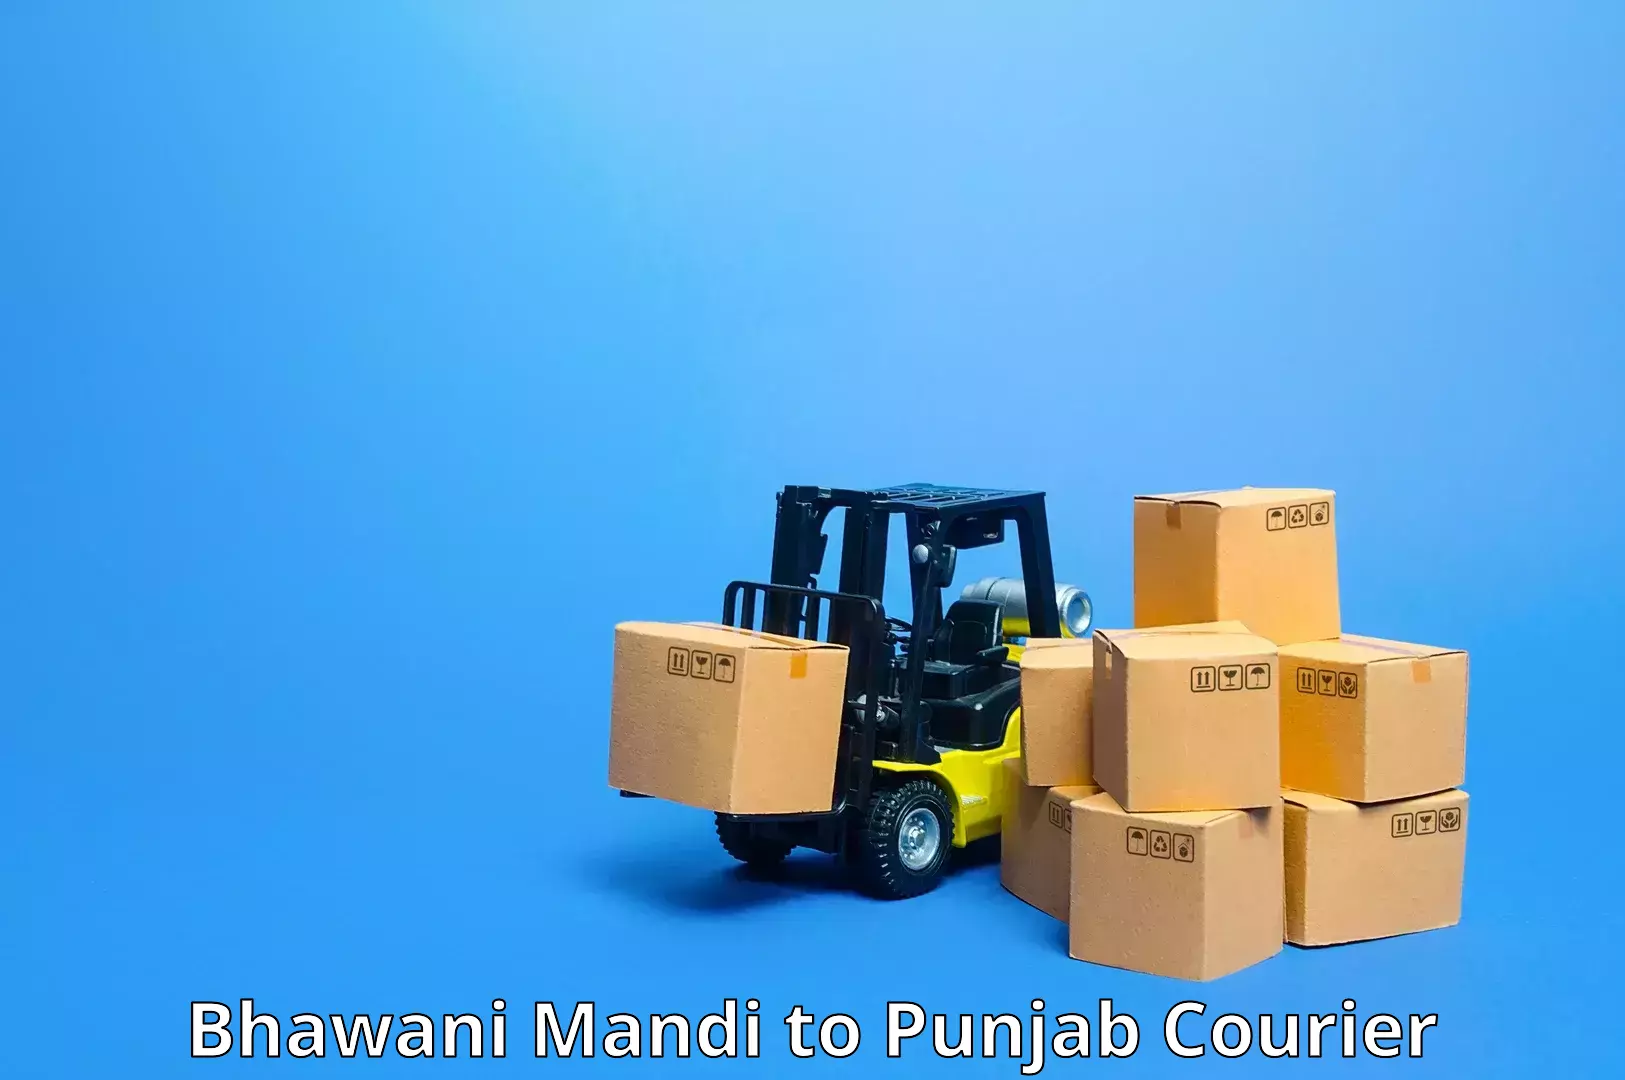 Courier service booking in Bhawani Mandi to Amritsar